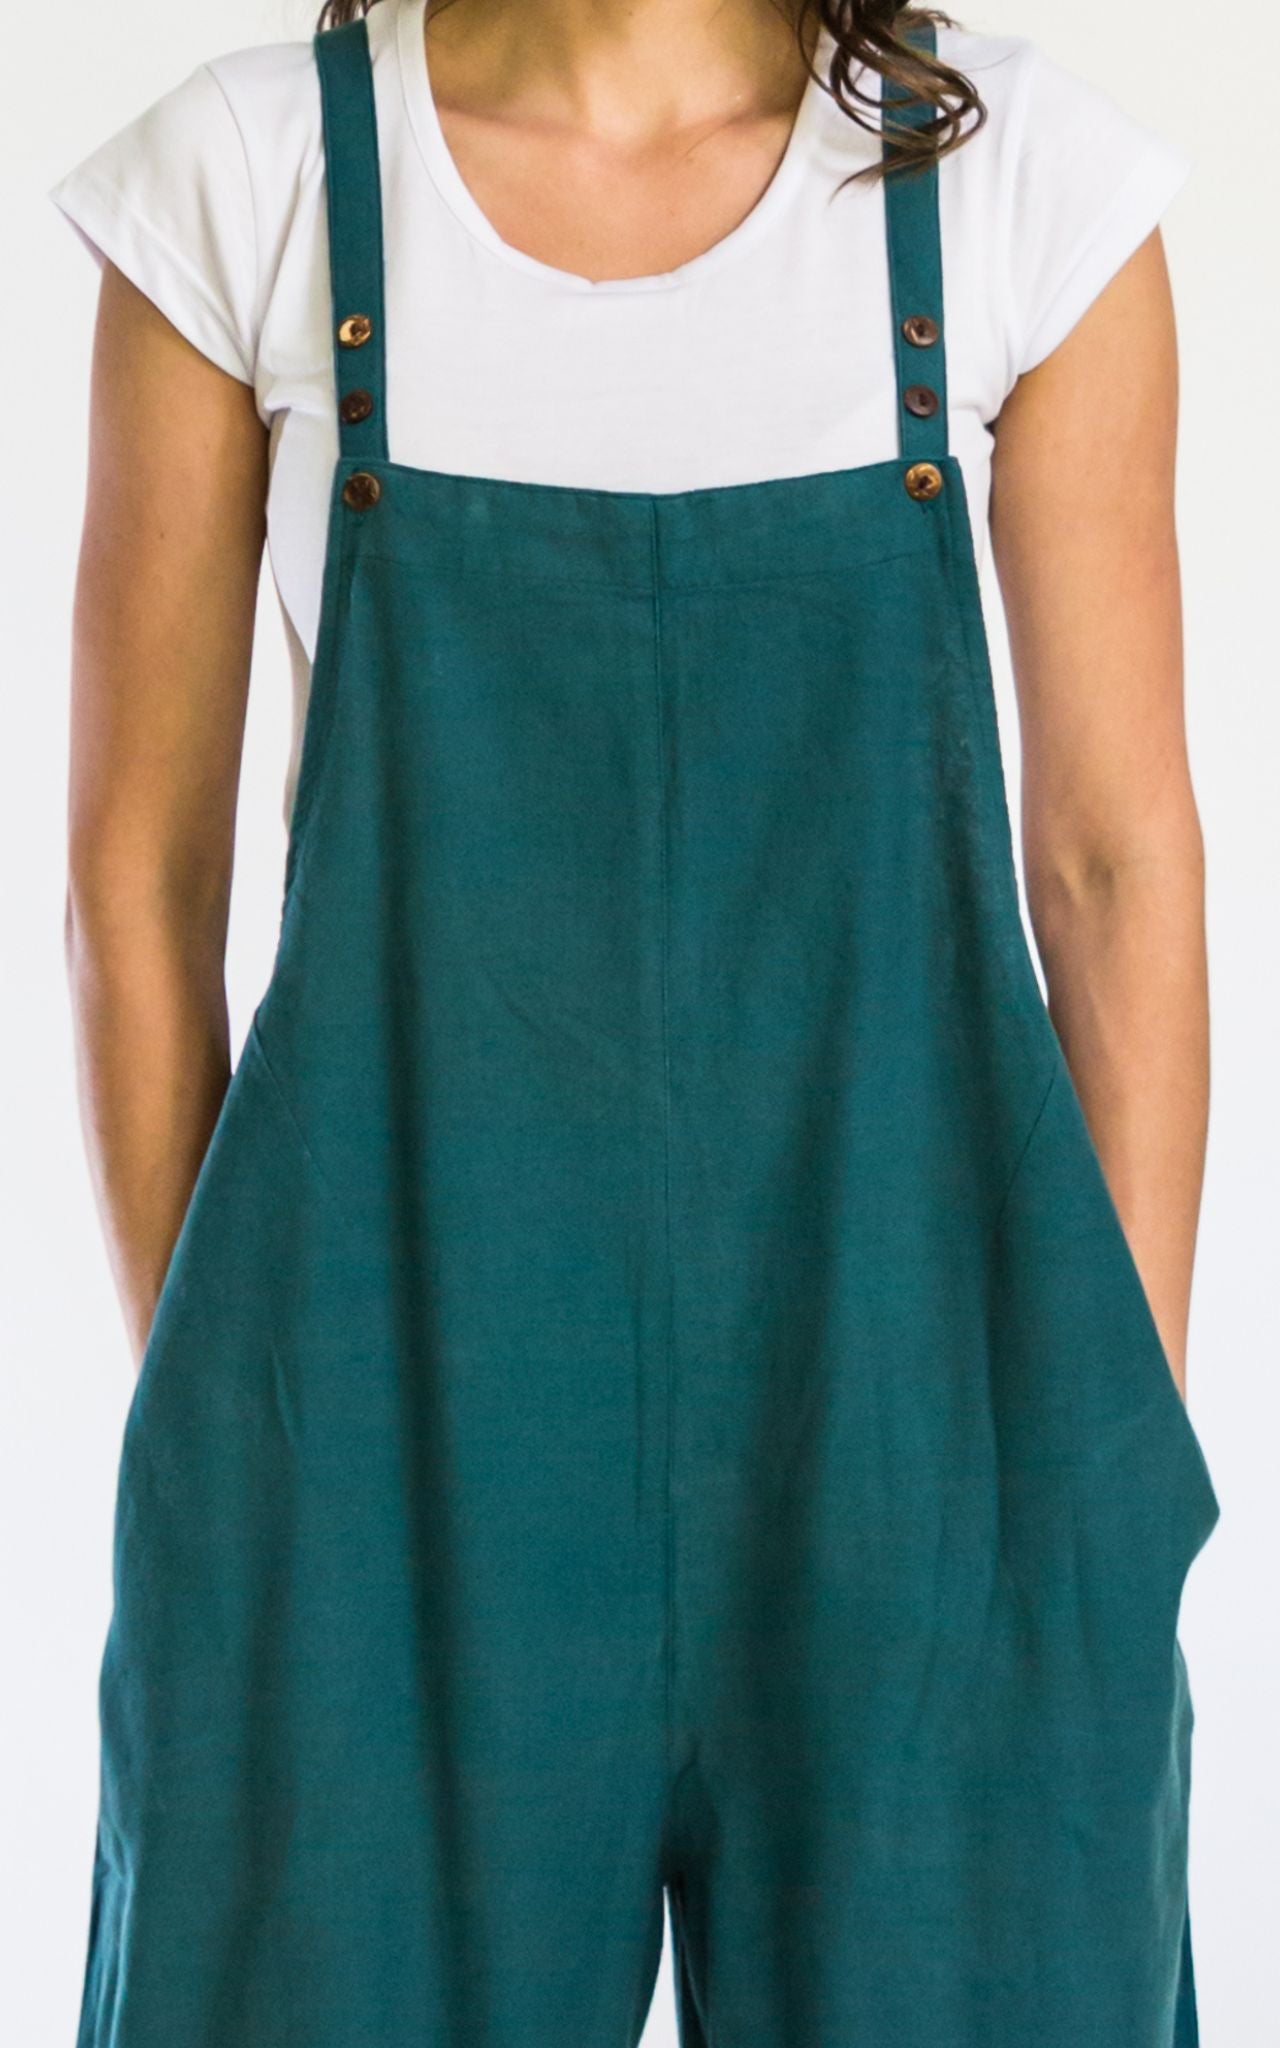 Surya Australia Ethical Cotton 'Juanita' Overalls Dungarees made in Nepal - Turquoise